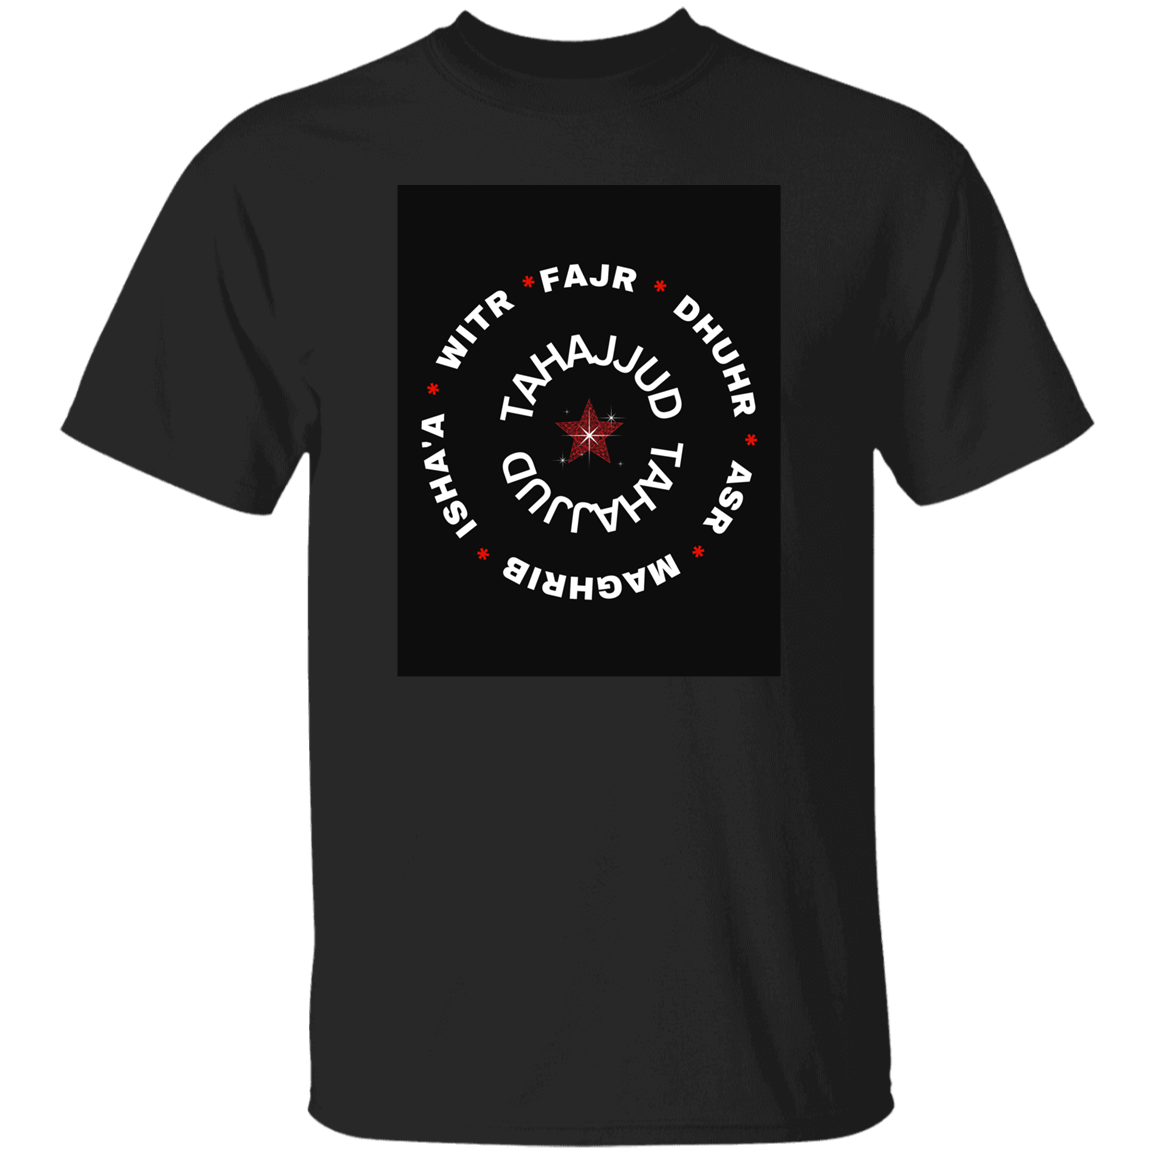 PRAYERS IN A CIRCLE LOGO  T-Shirt (MORE COLOR OPTIONS)